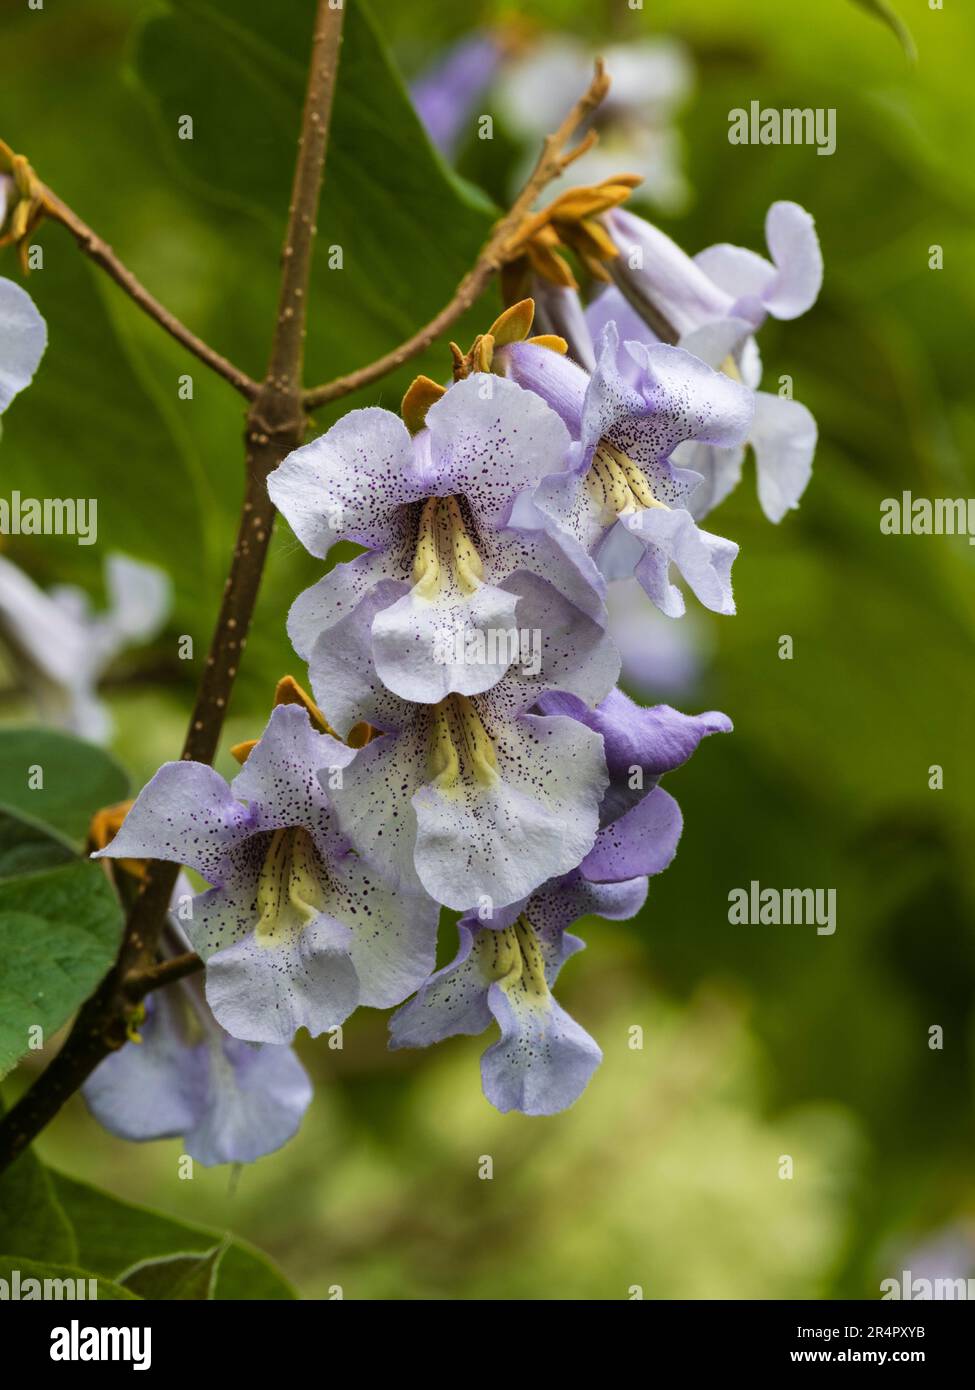 Blue spotted late spring flowers of the fast growing deciduous Sapphire dragon tree, Paulownia kawakami, Stock Photo